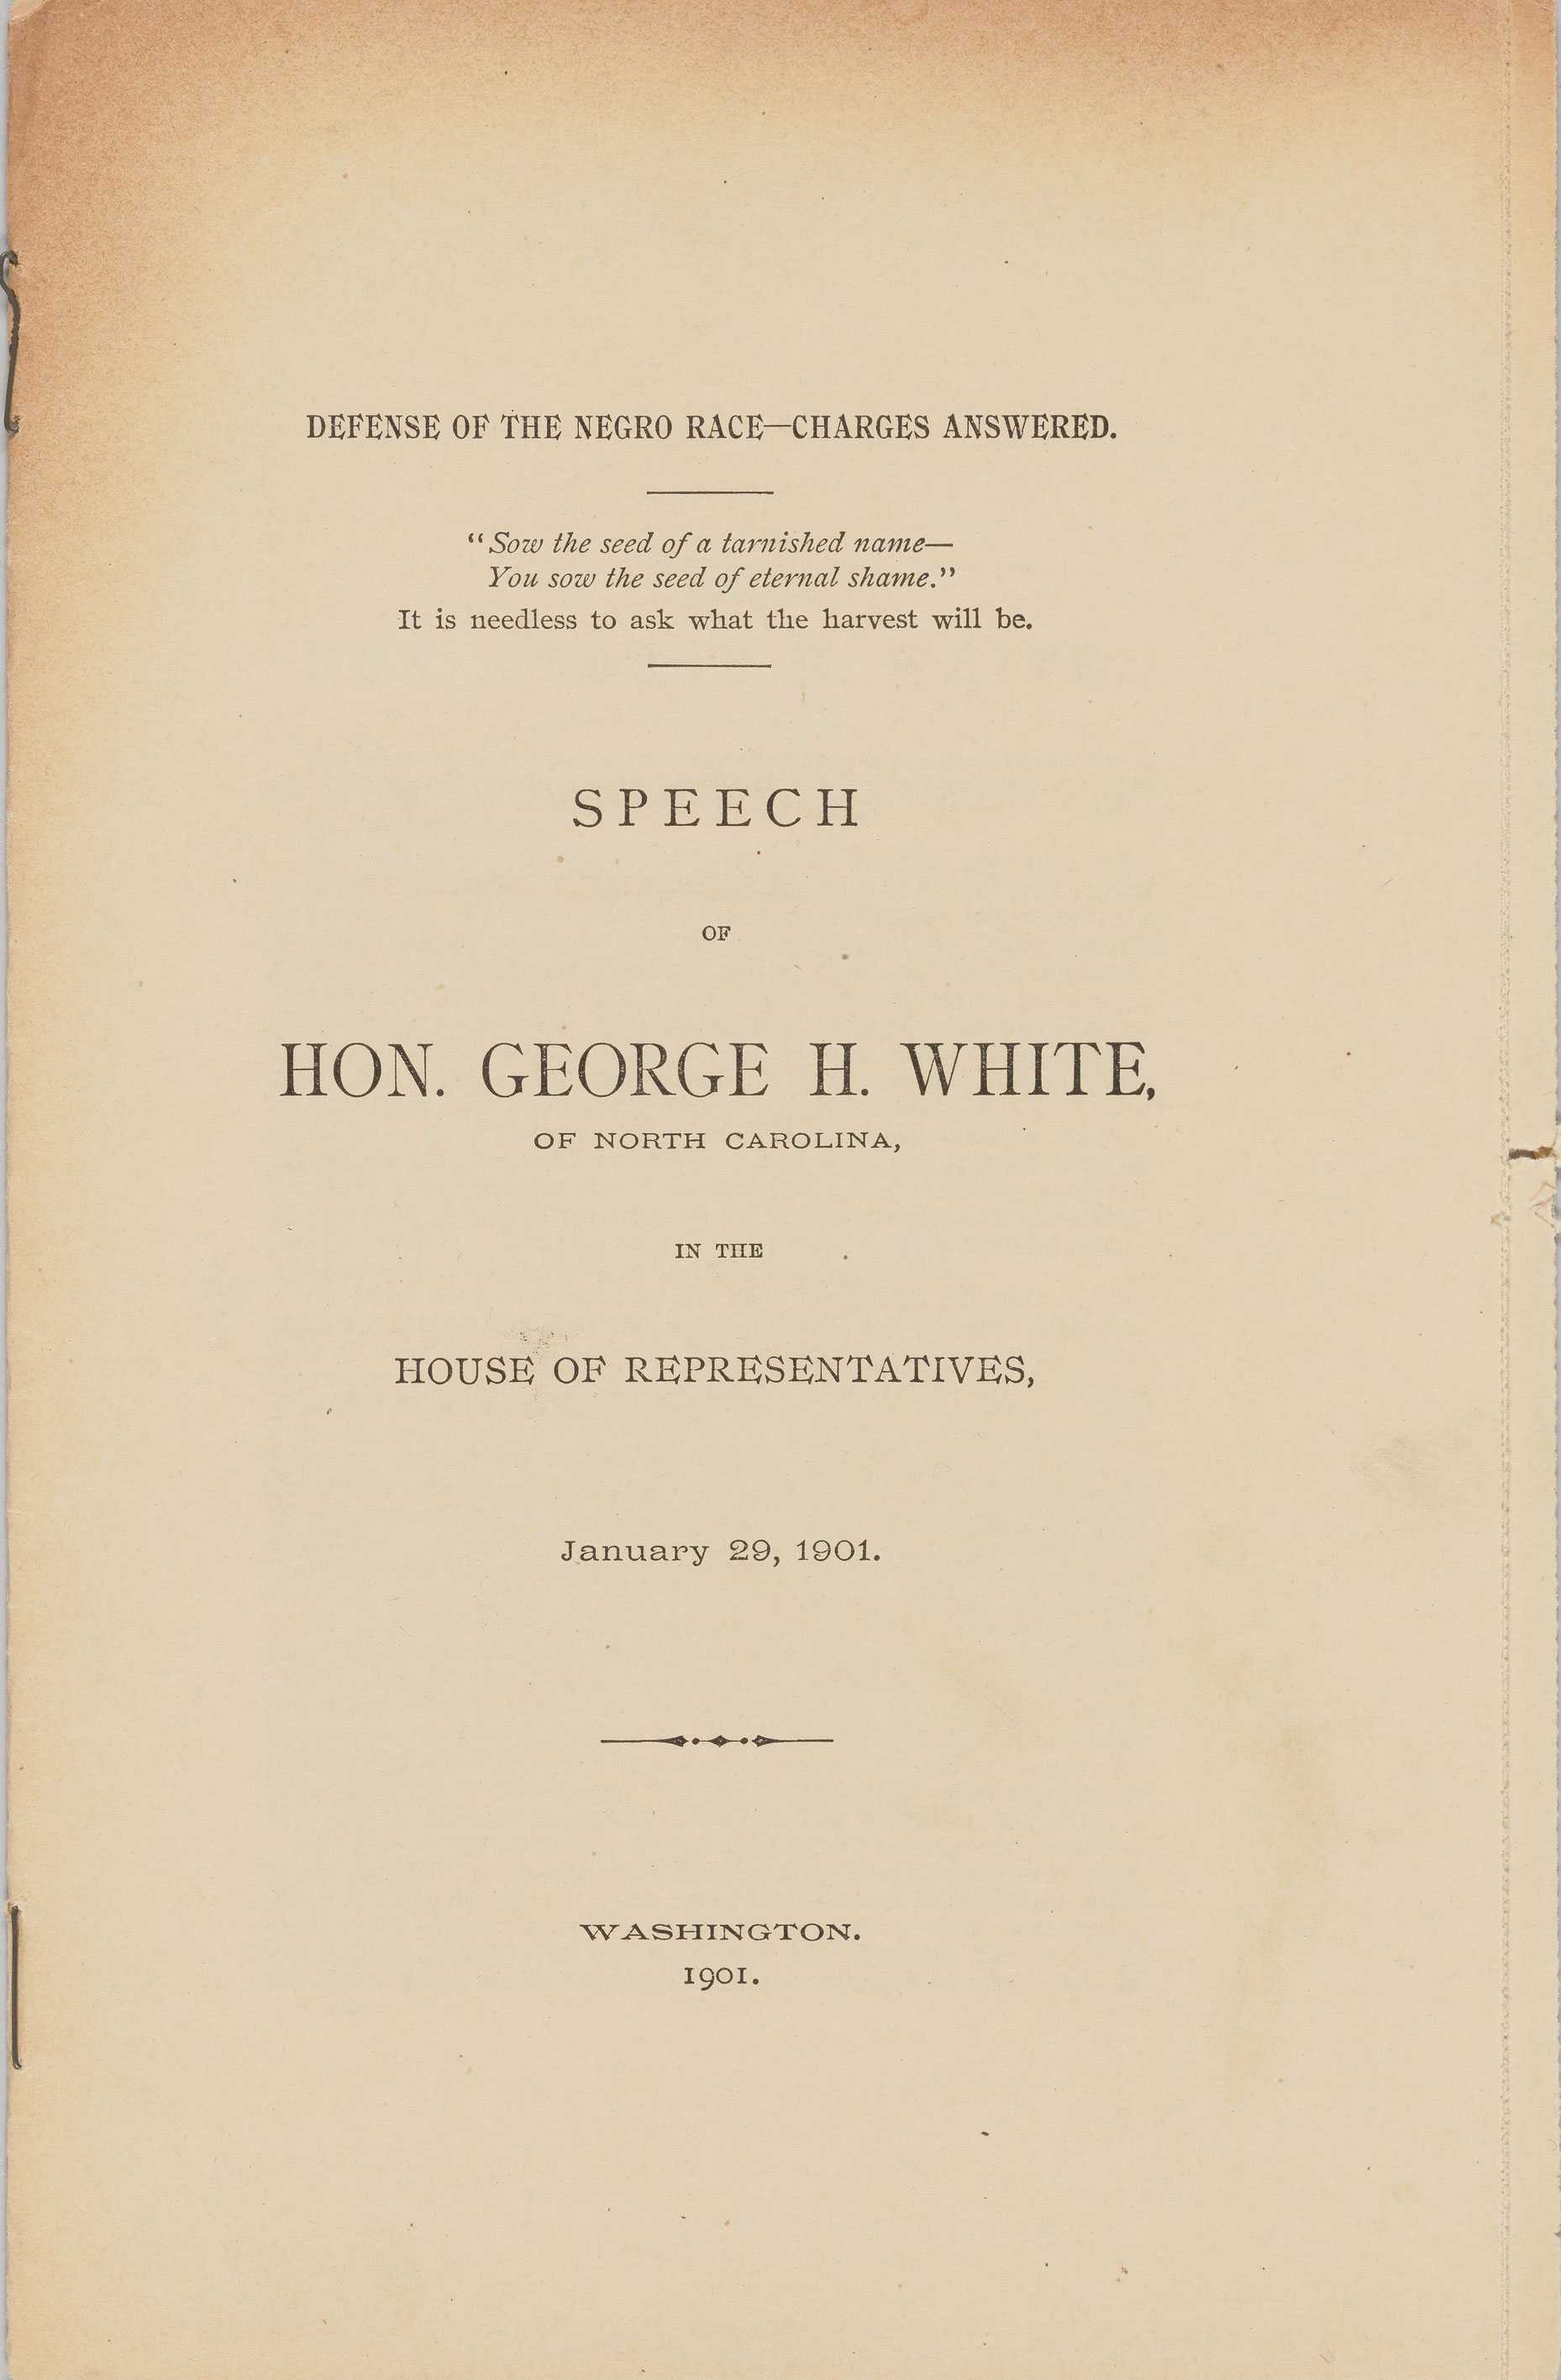 Cover page of the speech "Defense of the Negro Race" by Hon. George H. White